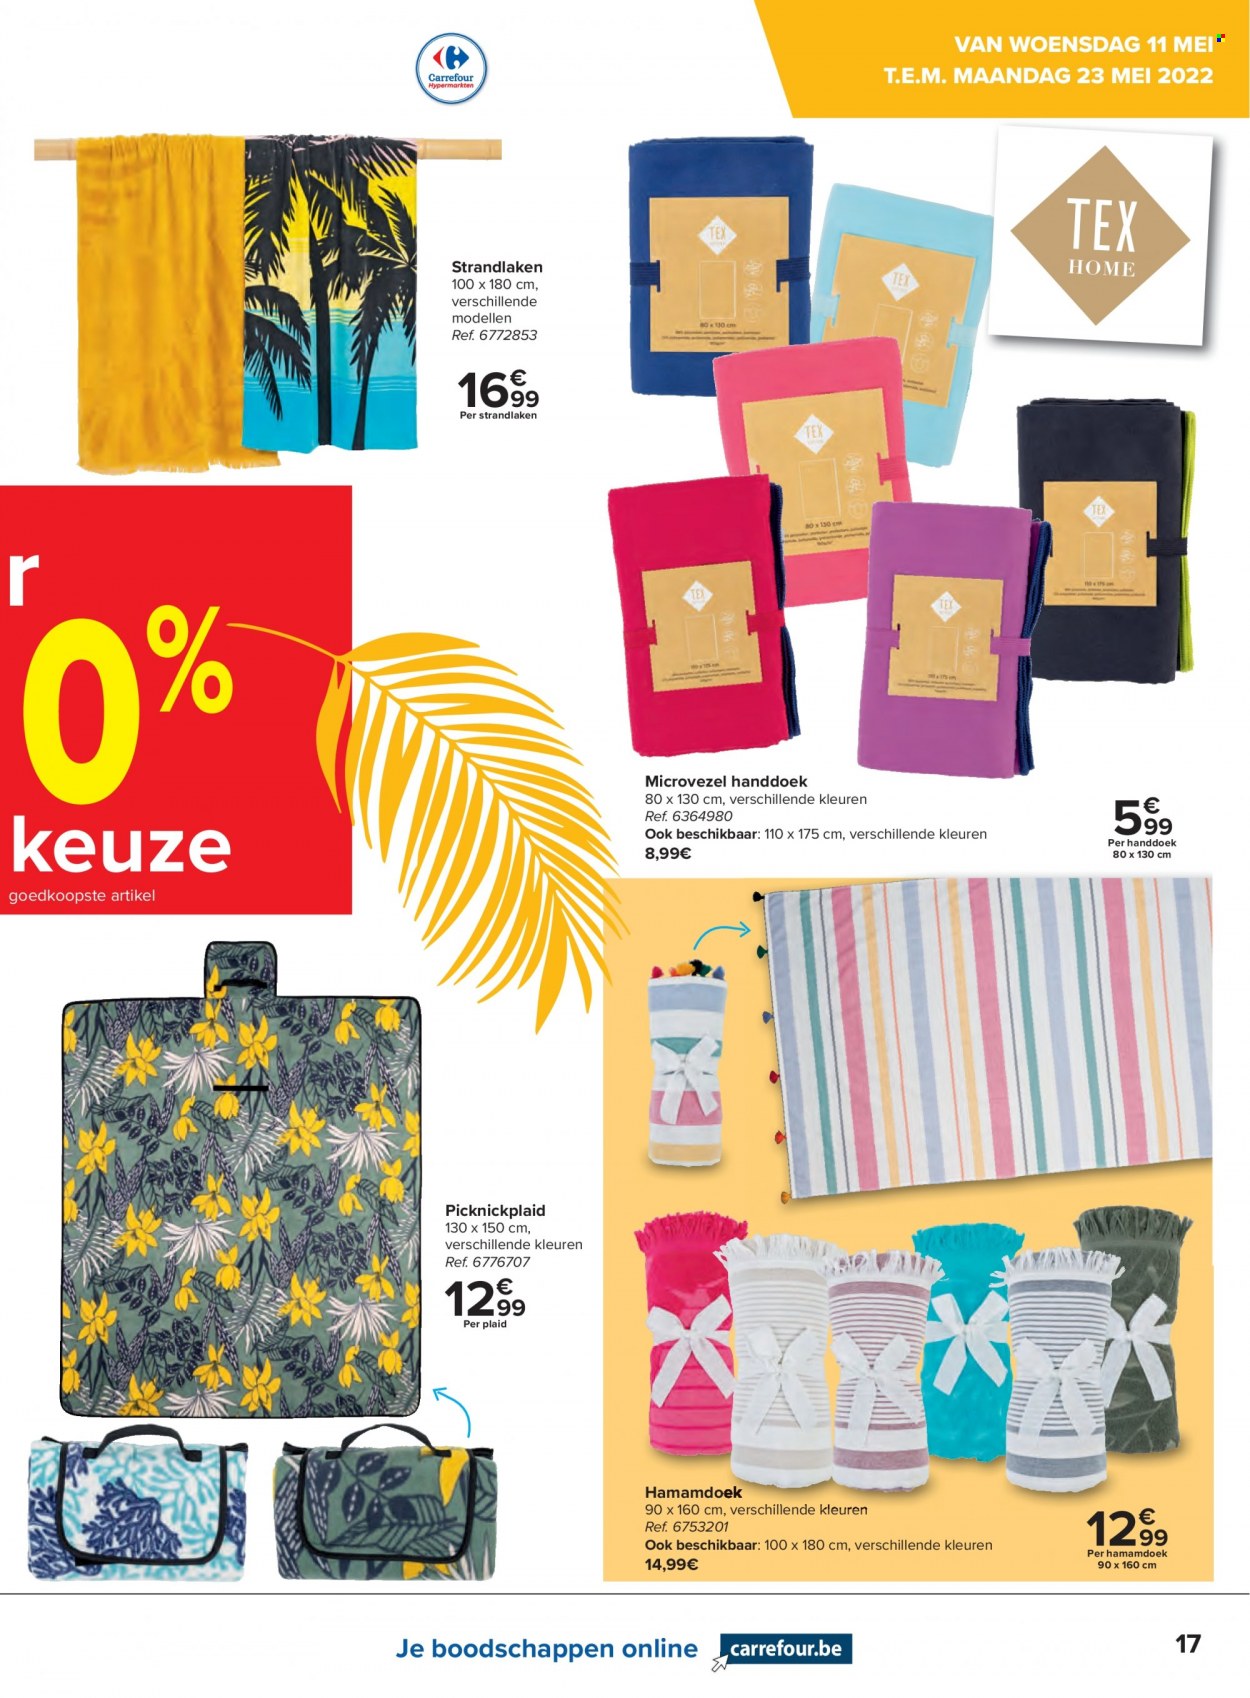 Catalogue Carrefour hypermarkt - 11.5.2022 - 23.5.2022. Page 17.